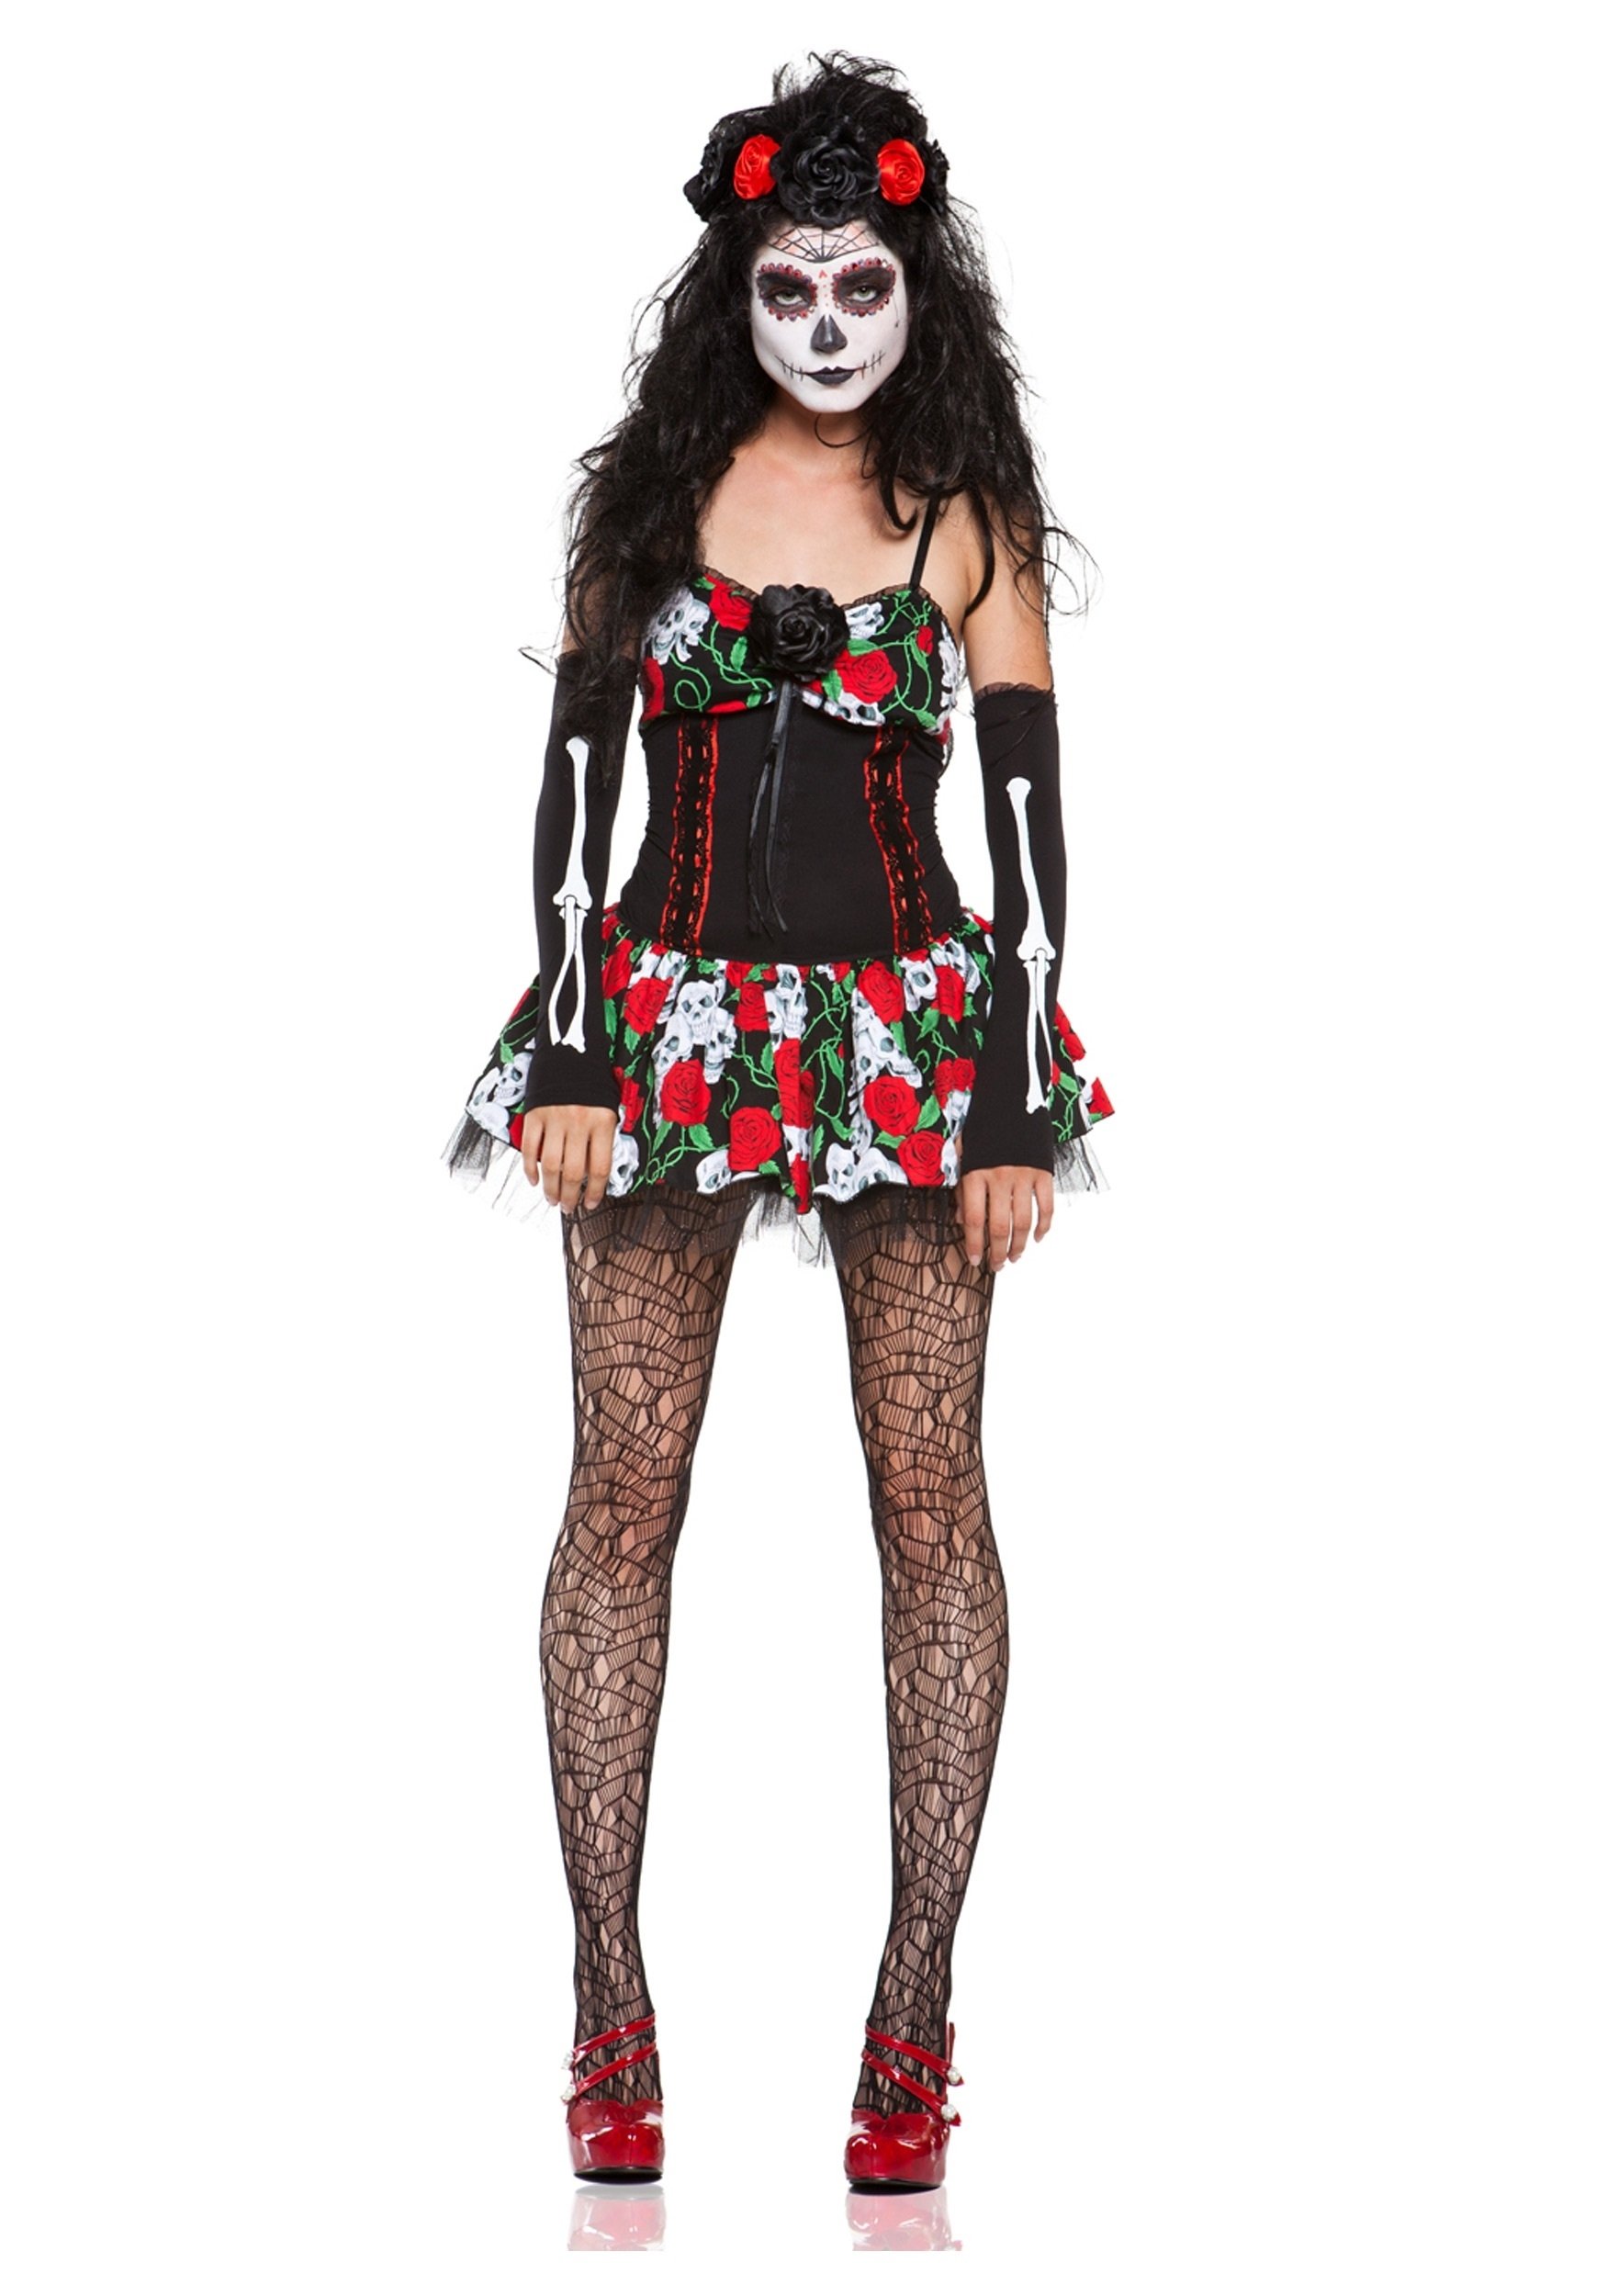 10 Pretty Day Of The Dead Outfit Ideas dahlia of the dead costume halloween costume ideas 2016 2 2022